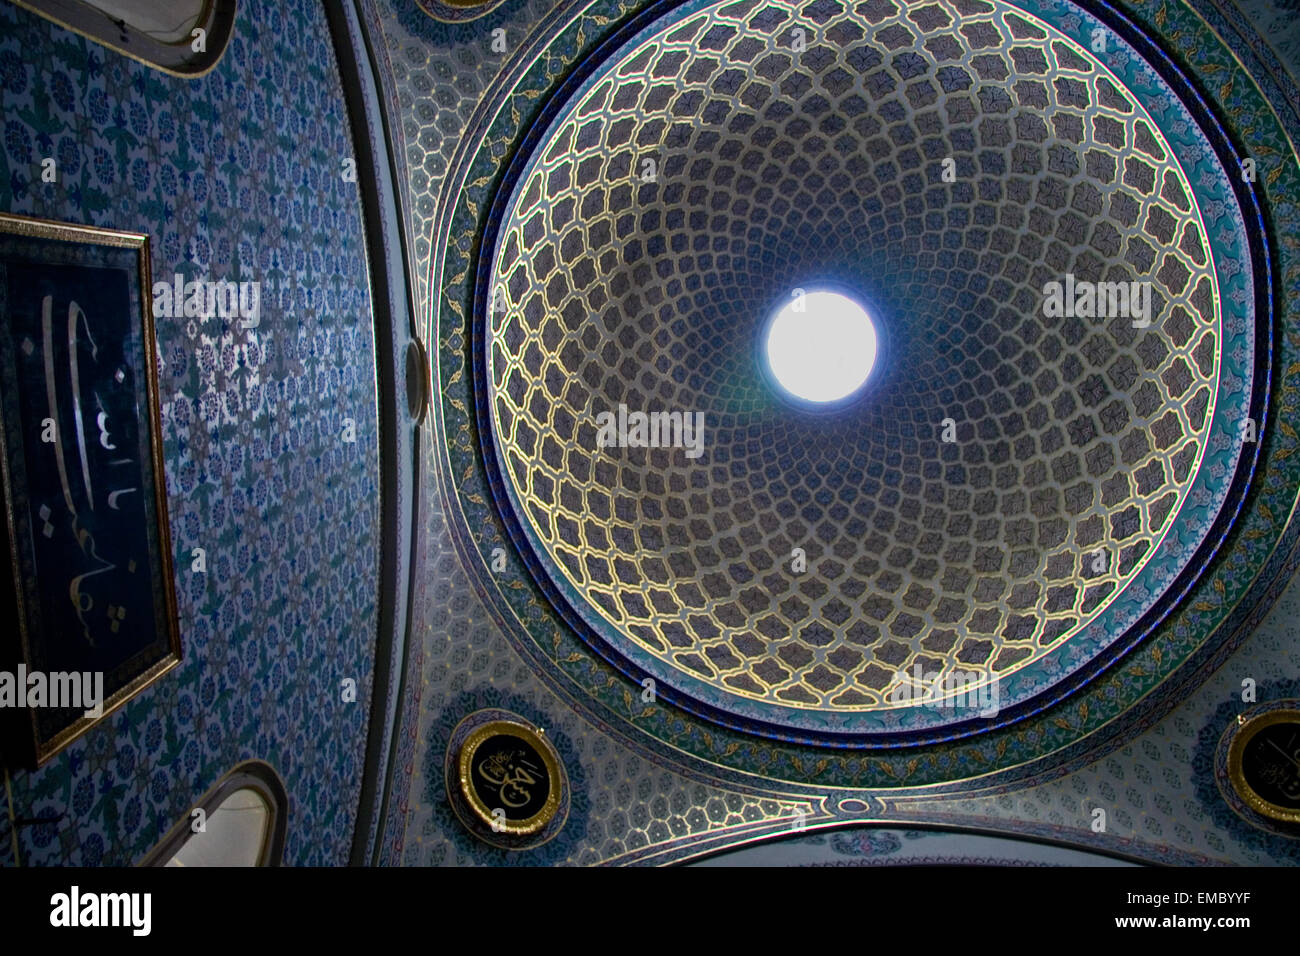 Arabesque dome ceiling of the Topkapi palace, Istanbul Stock Photo